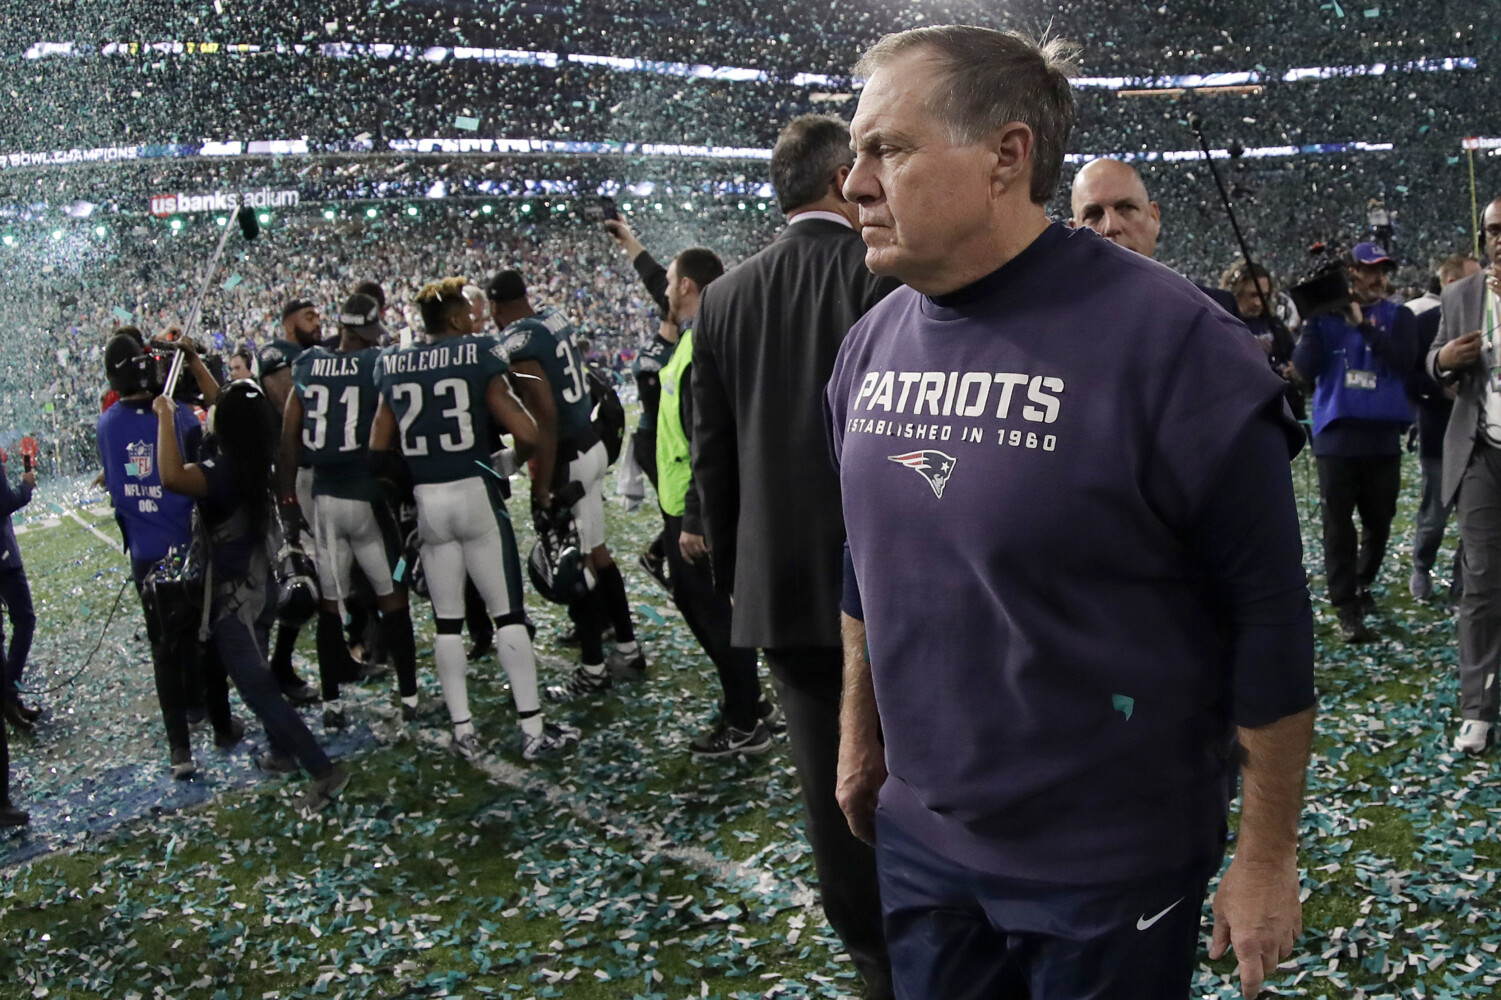 Eagles hold off Patriots 41-33 in Super Bowl LII